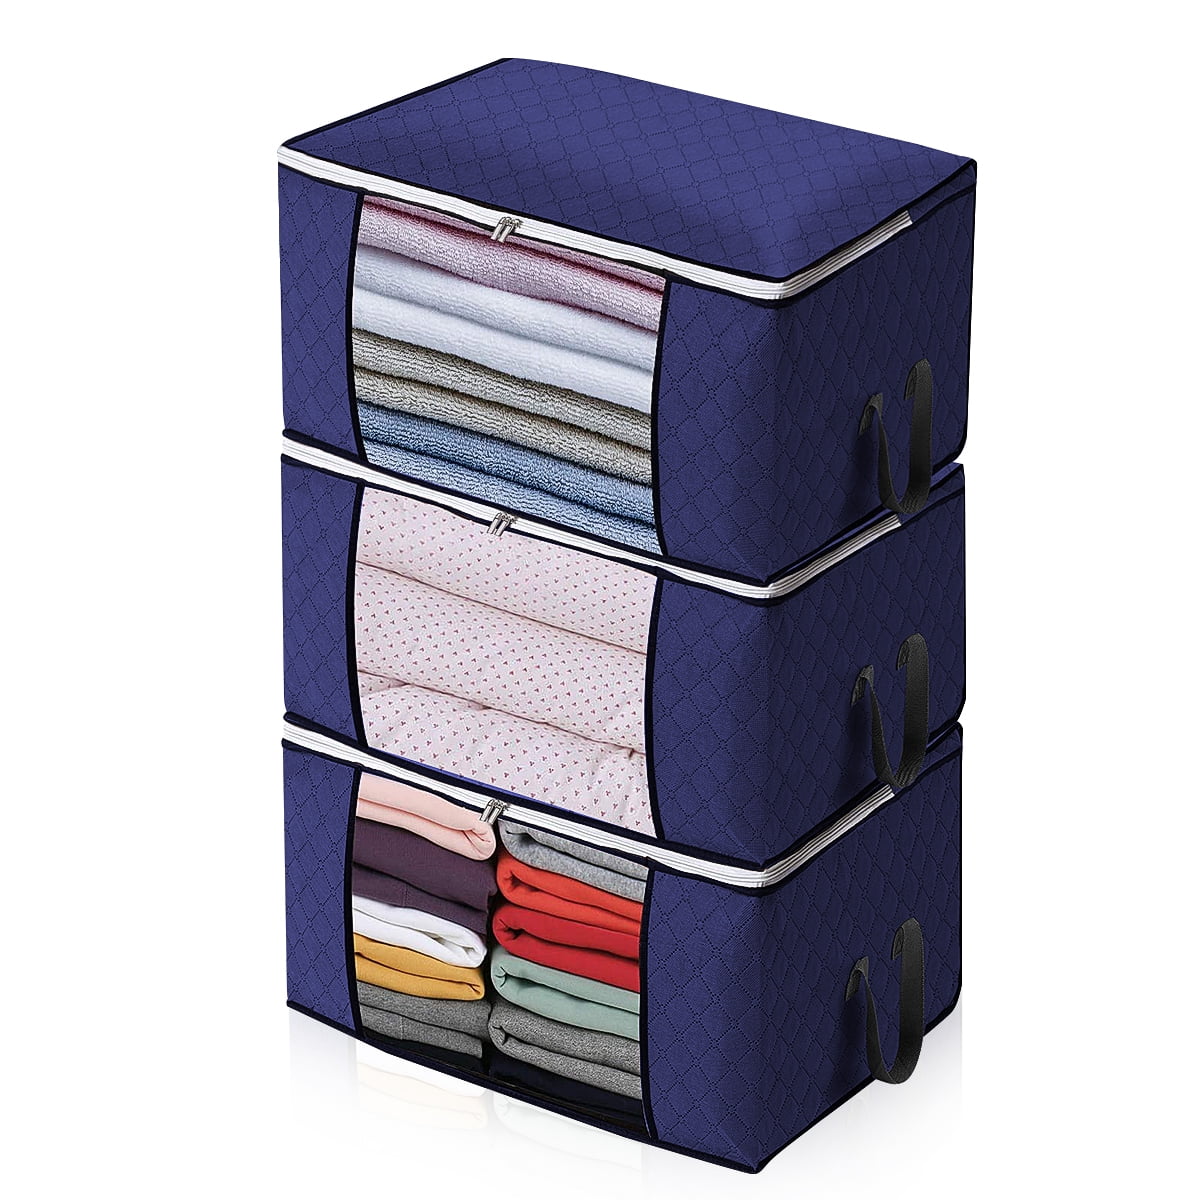 Foldable Storage Bag Organizers Large Clear Window & Carry Handles 